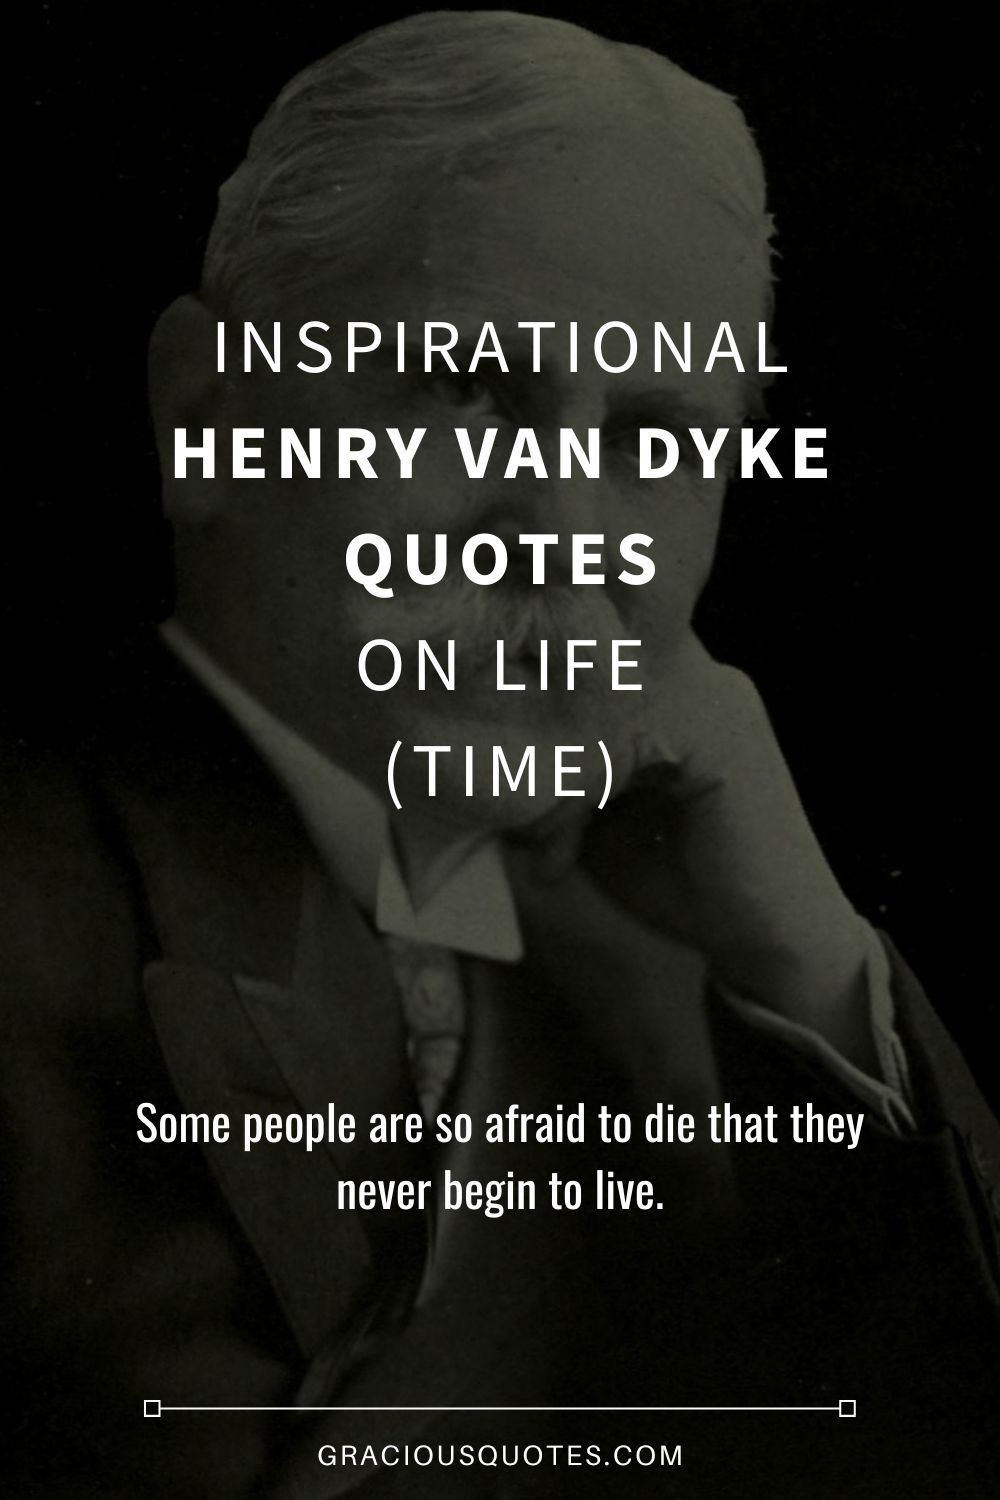 Inspirational Henry Van Dyke Quotes on Life (TIME) - Gracious Quotes